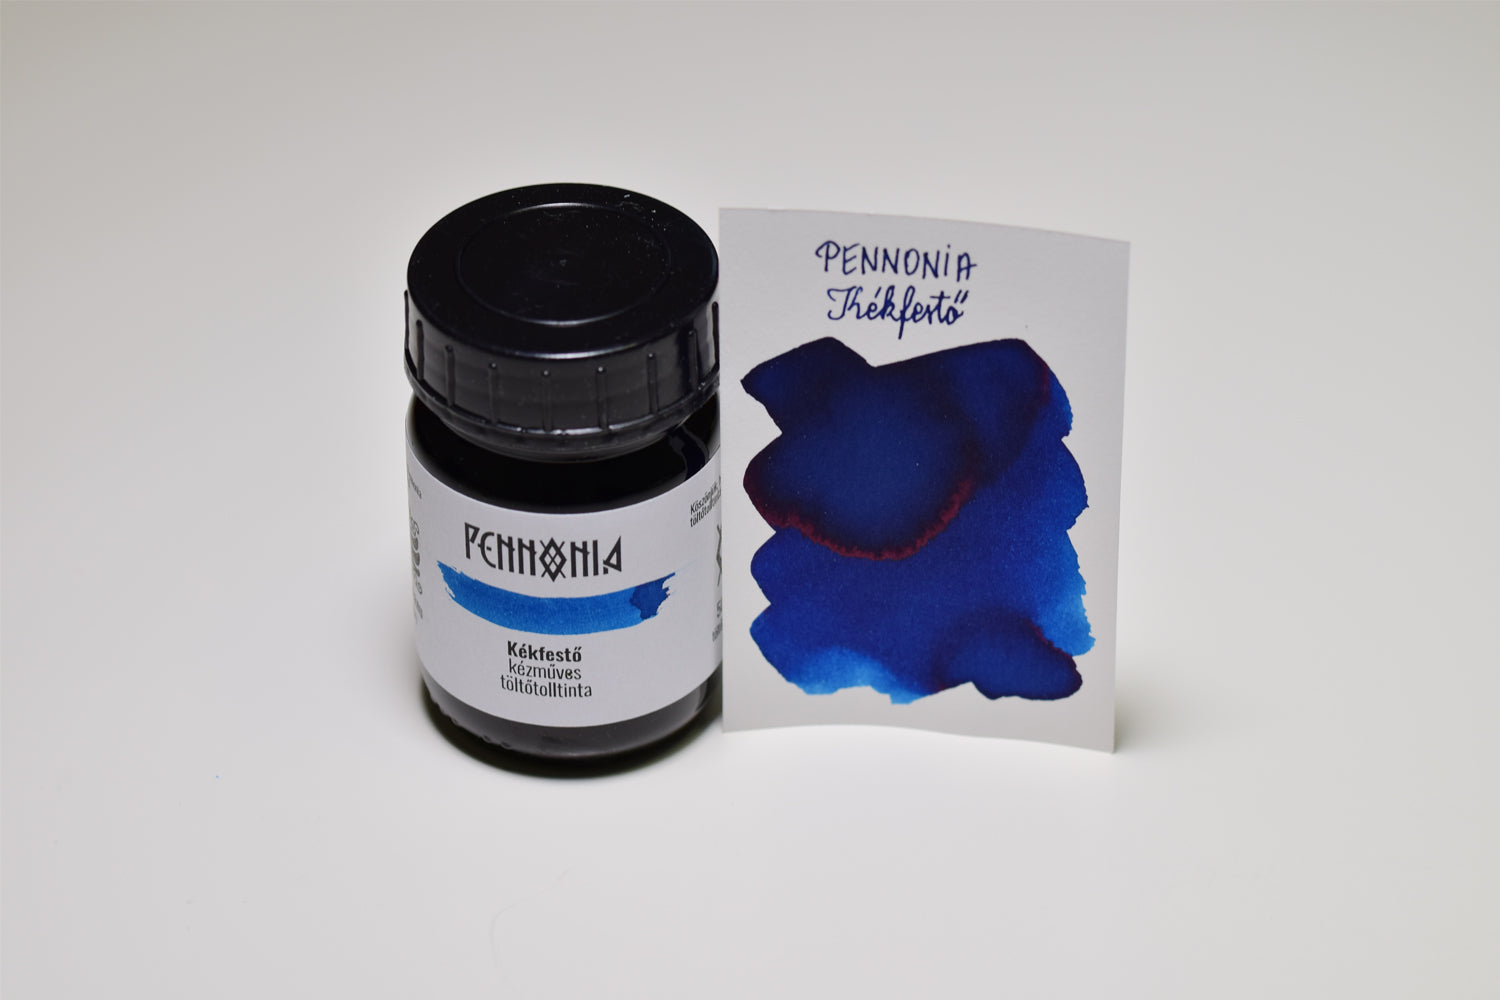 Pennonia Embroidery Blue - Bottled Ink 50ml